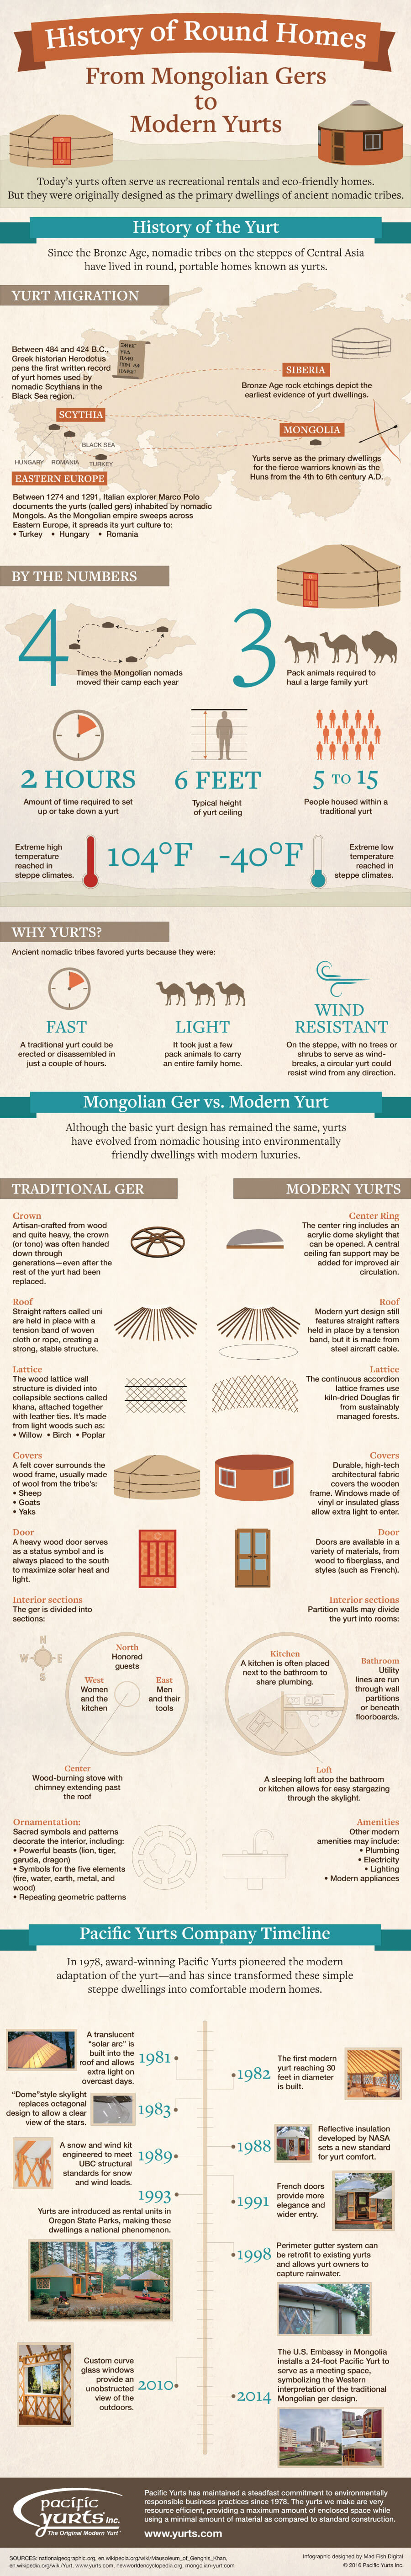 History of Round Homes: From Mongolian Gers to Modern Yurts